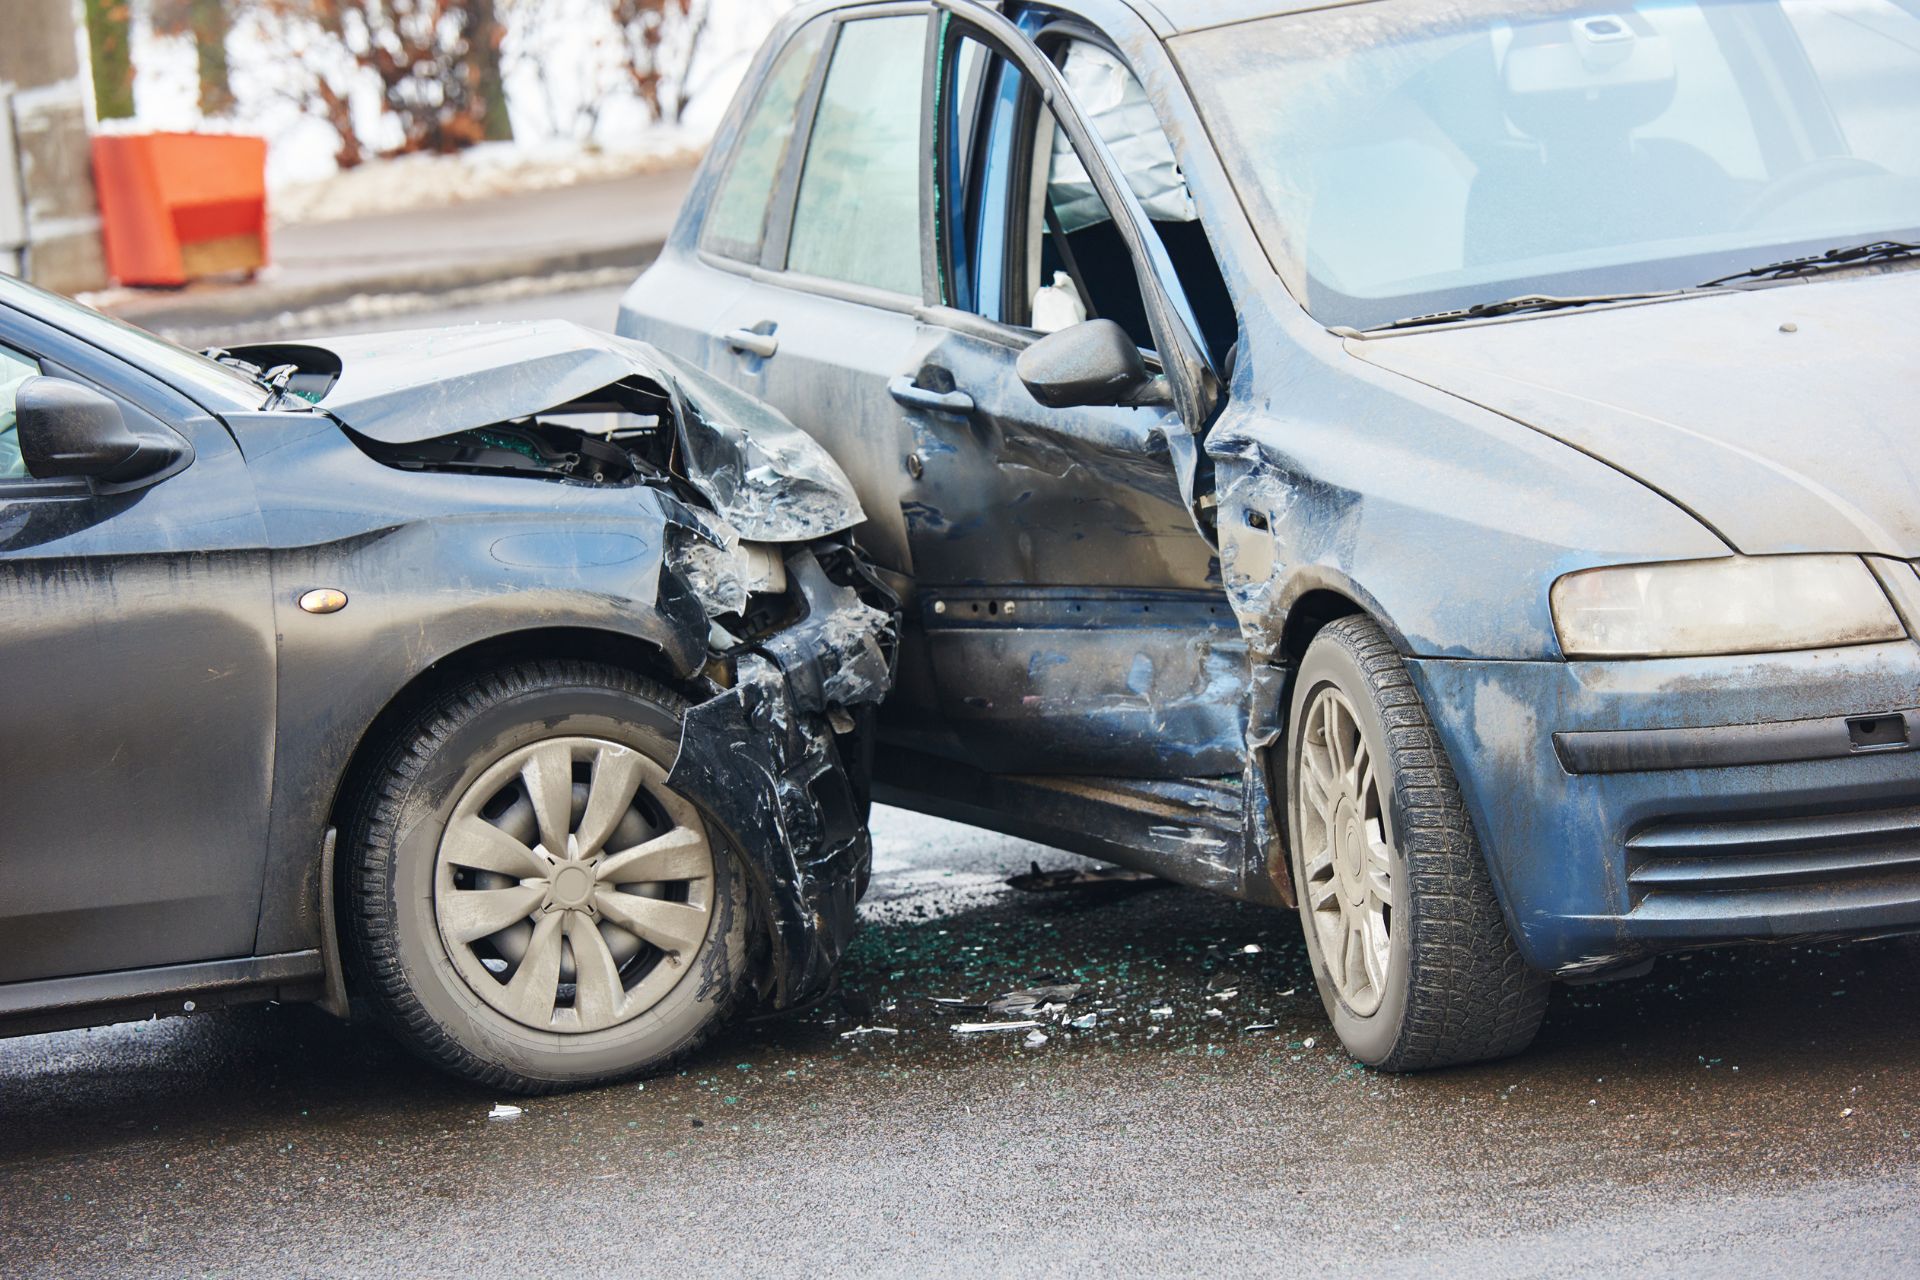 Your Rights and Responsibilities in a Car Total Loss Situation